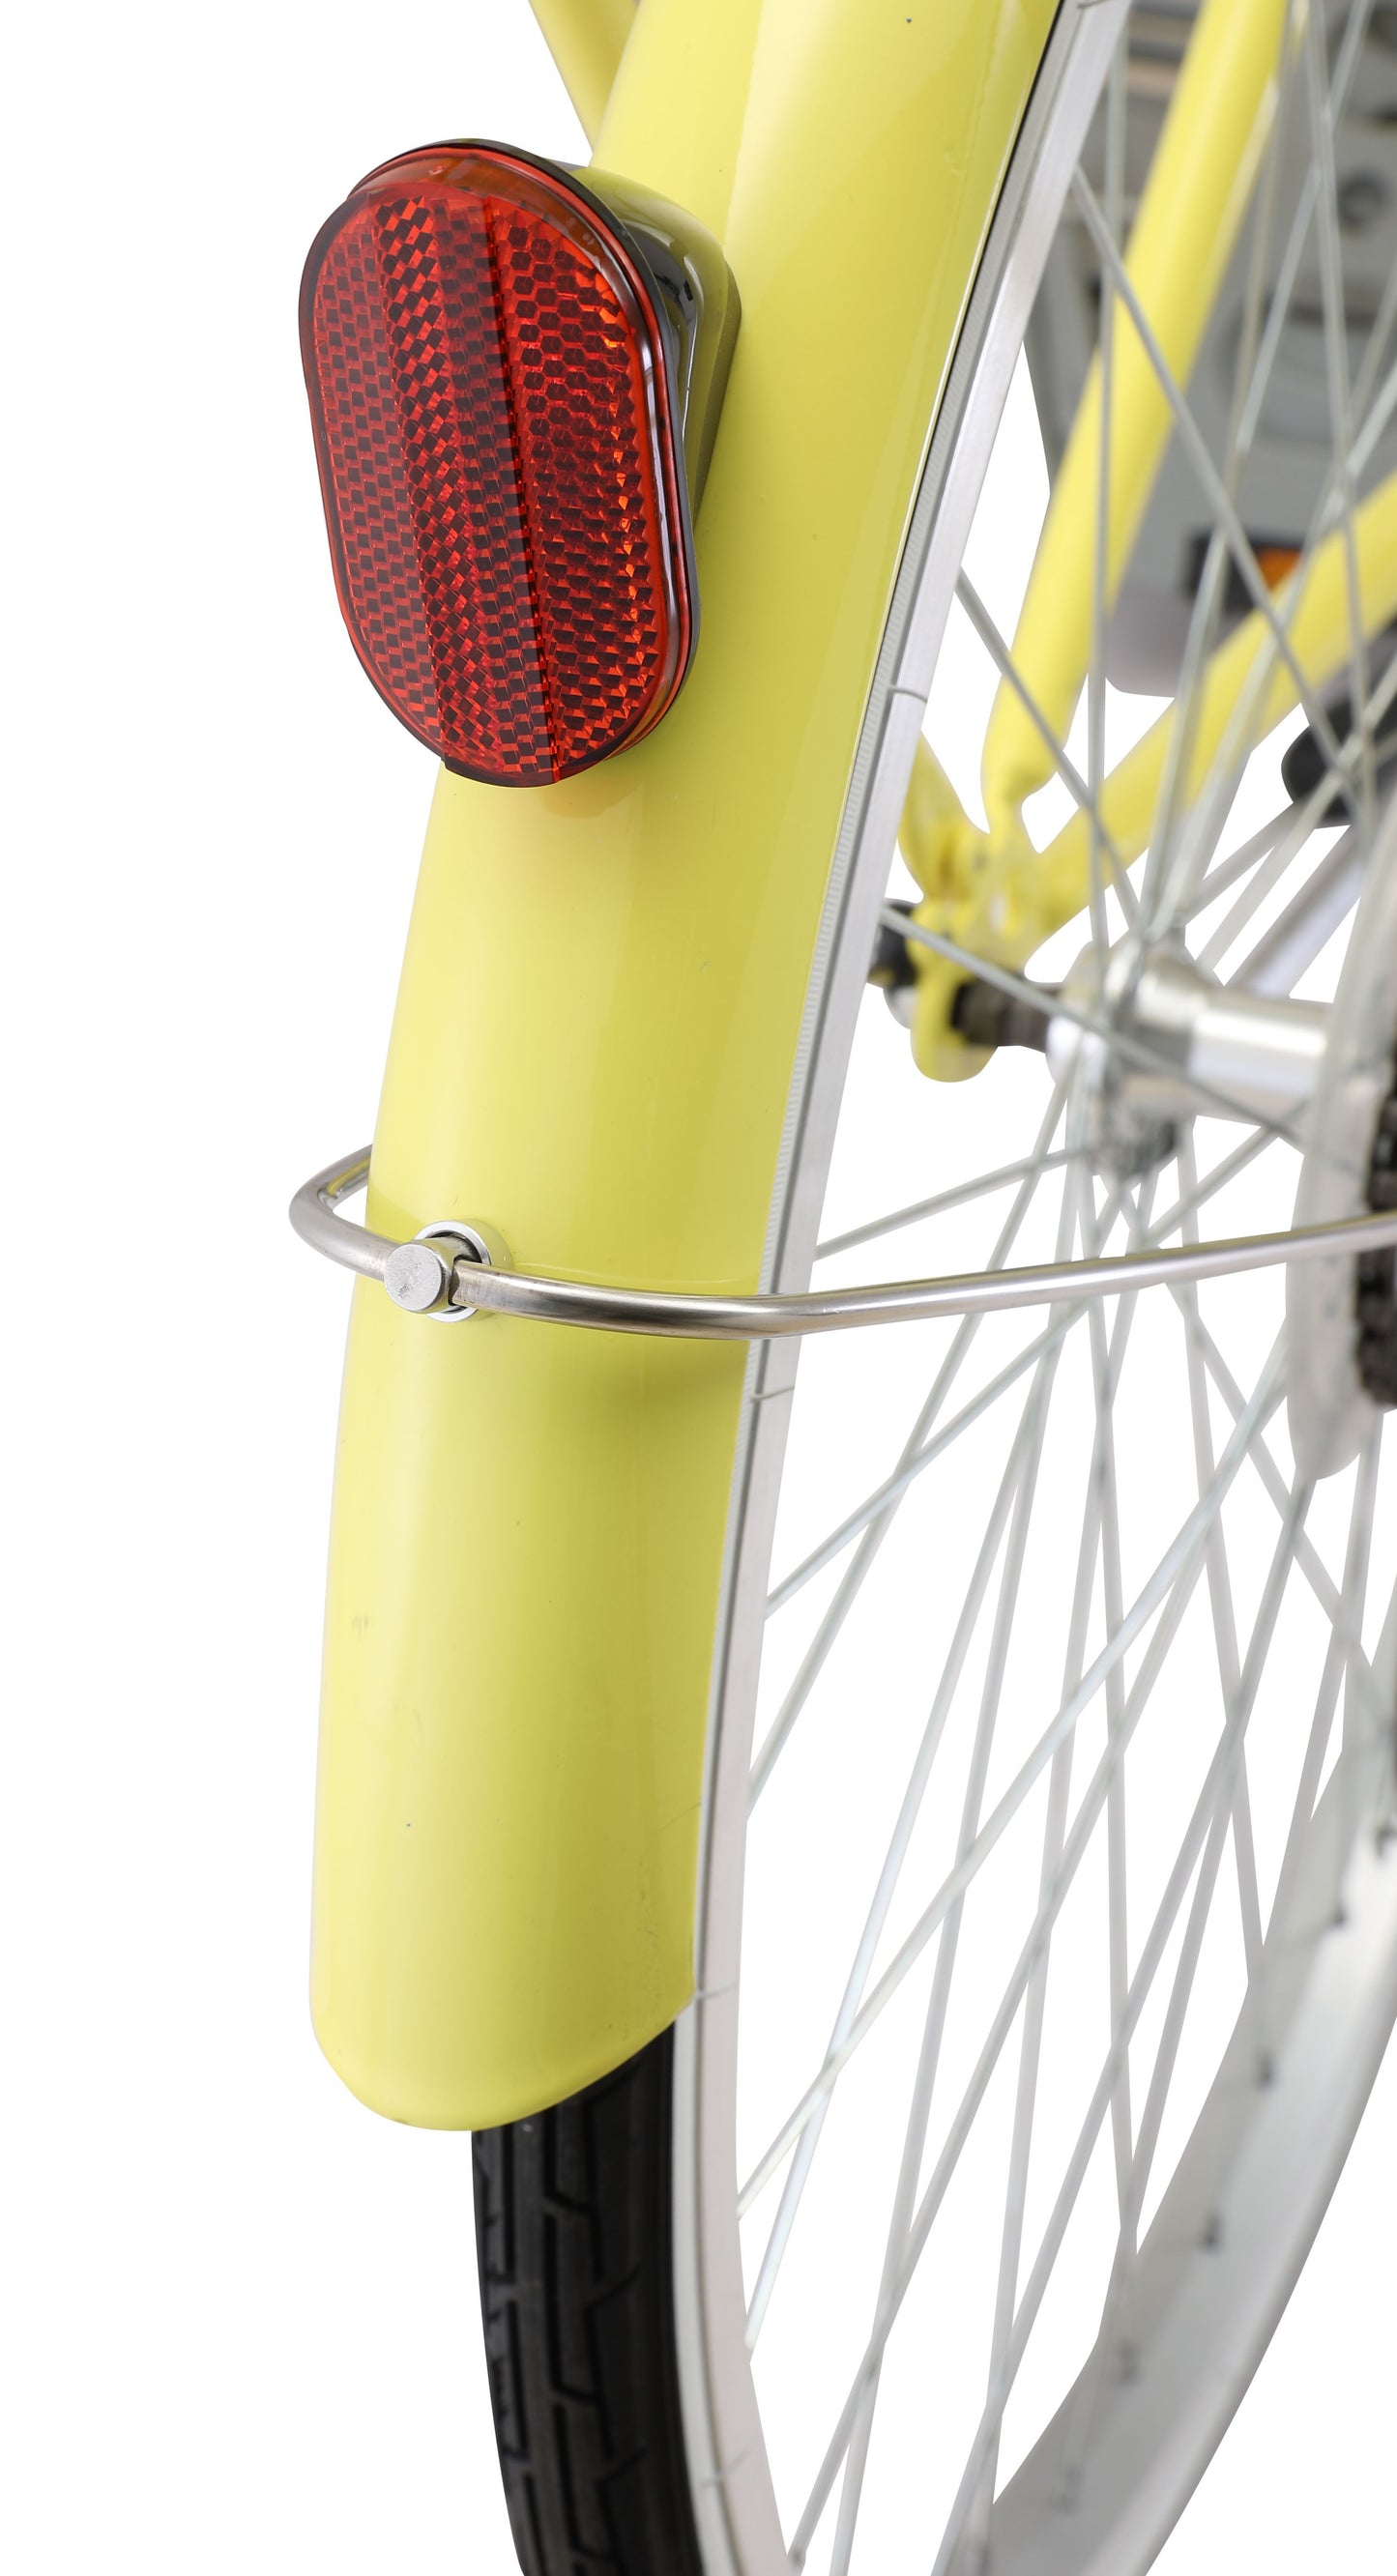 Ladies Classic Plus Vintage Bike in Lemon showing rear mudguard with red reflector from Reid Cycles Australia